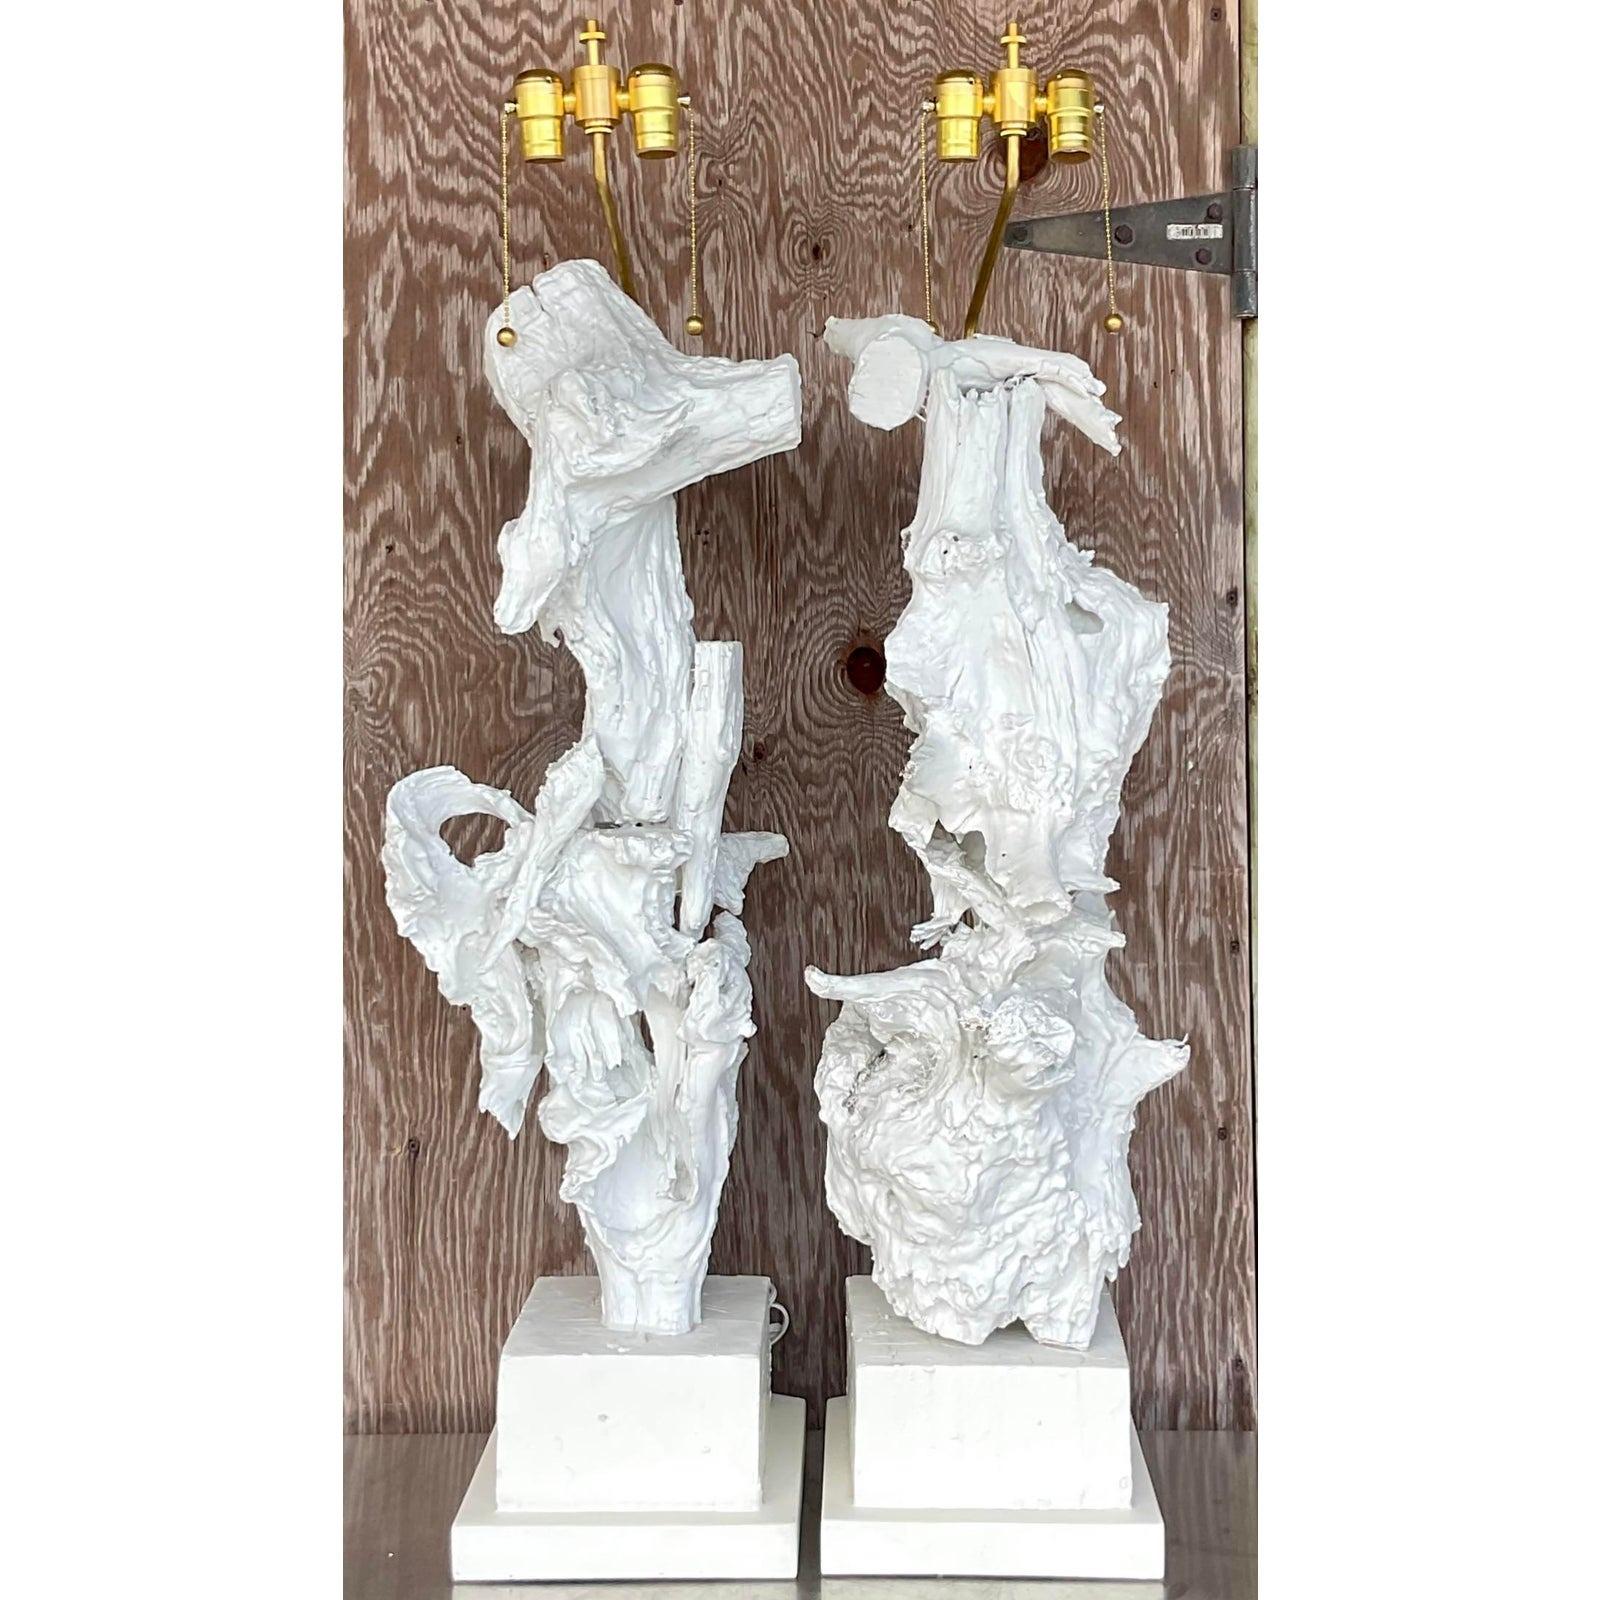 A spectacular pair of vintage monumental table lamps. Soaring painted driftwood on wooden plinths. Fully restored with all new wiring and hardware. Acquired from a Palm Beach estate.

The lamps are in great vintage condition. Minor scuffs and